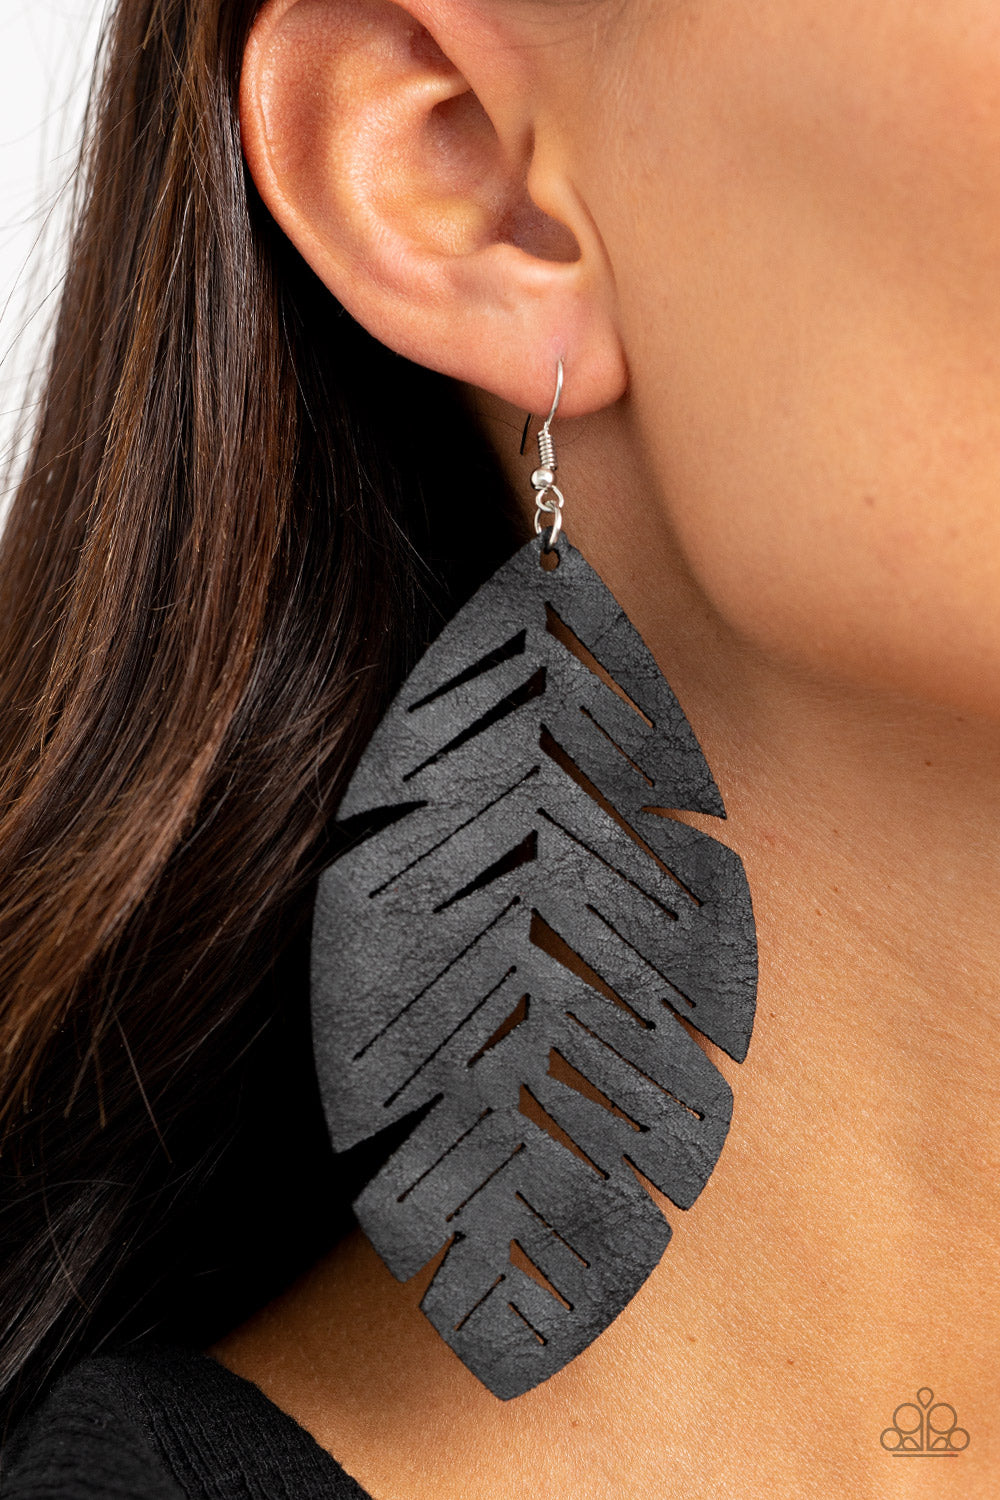 I Want To Fly Earrings - Black